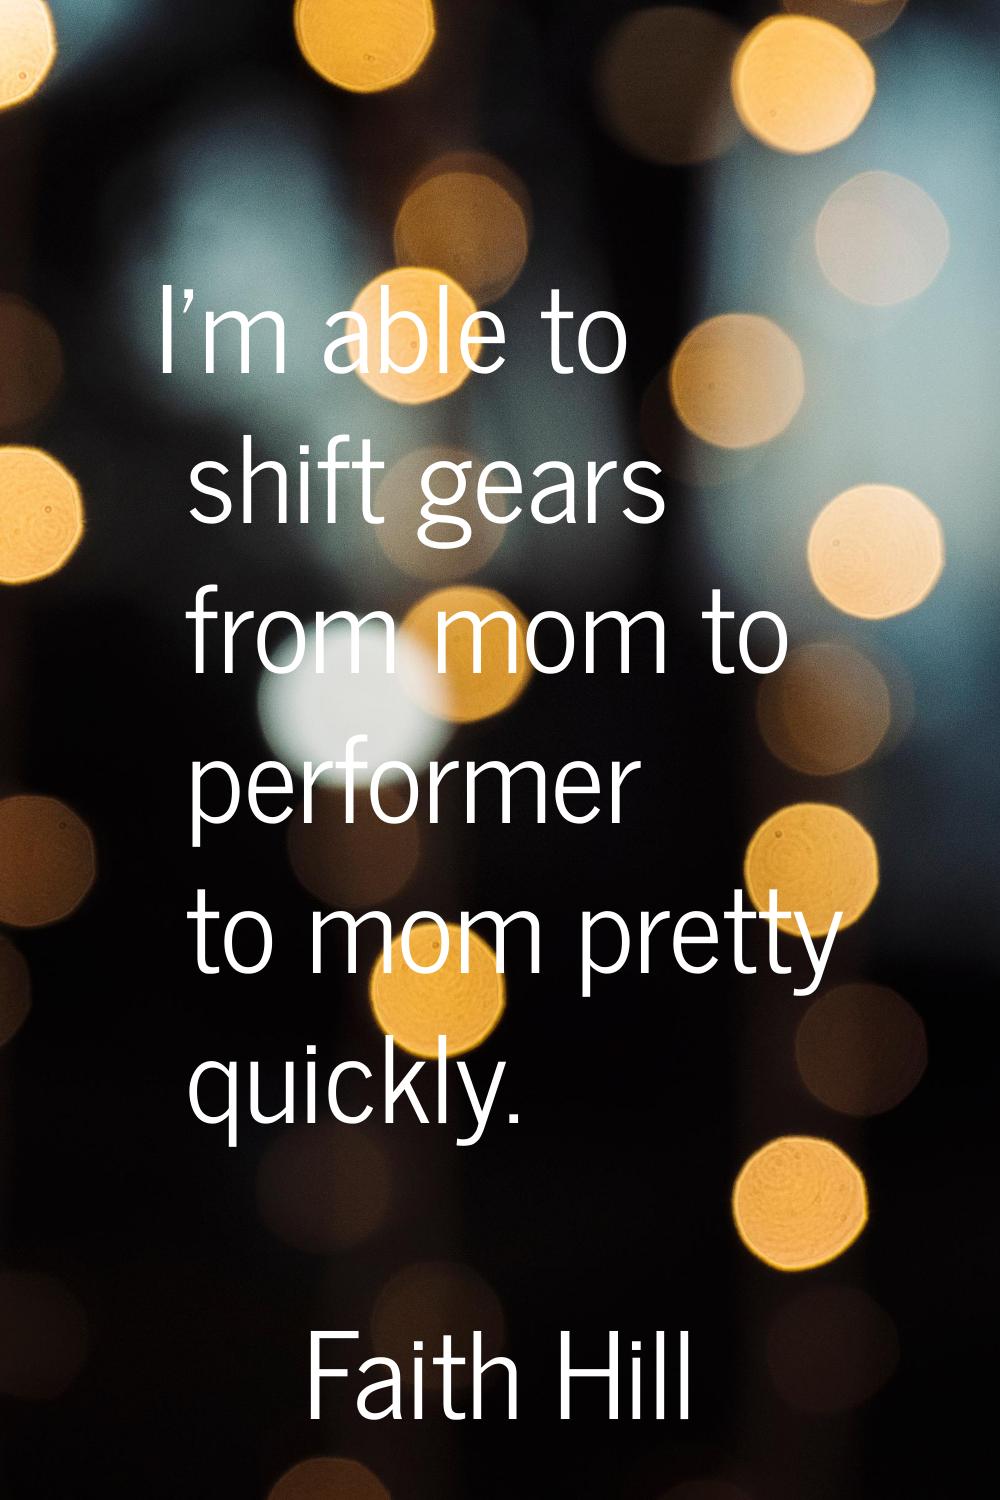 I'm able to shift gears from mom to performer to mom pretty quickly.